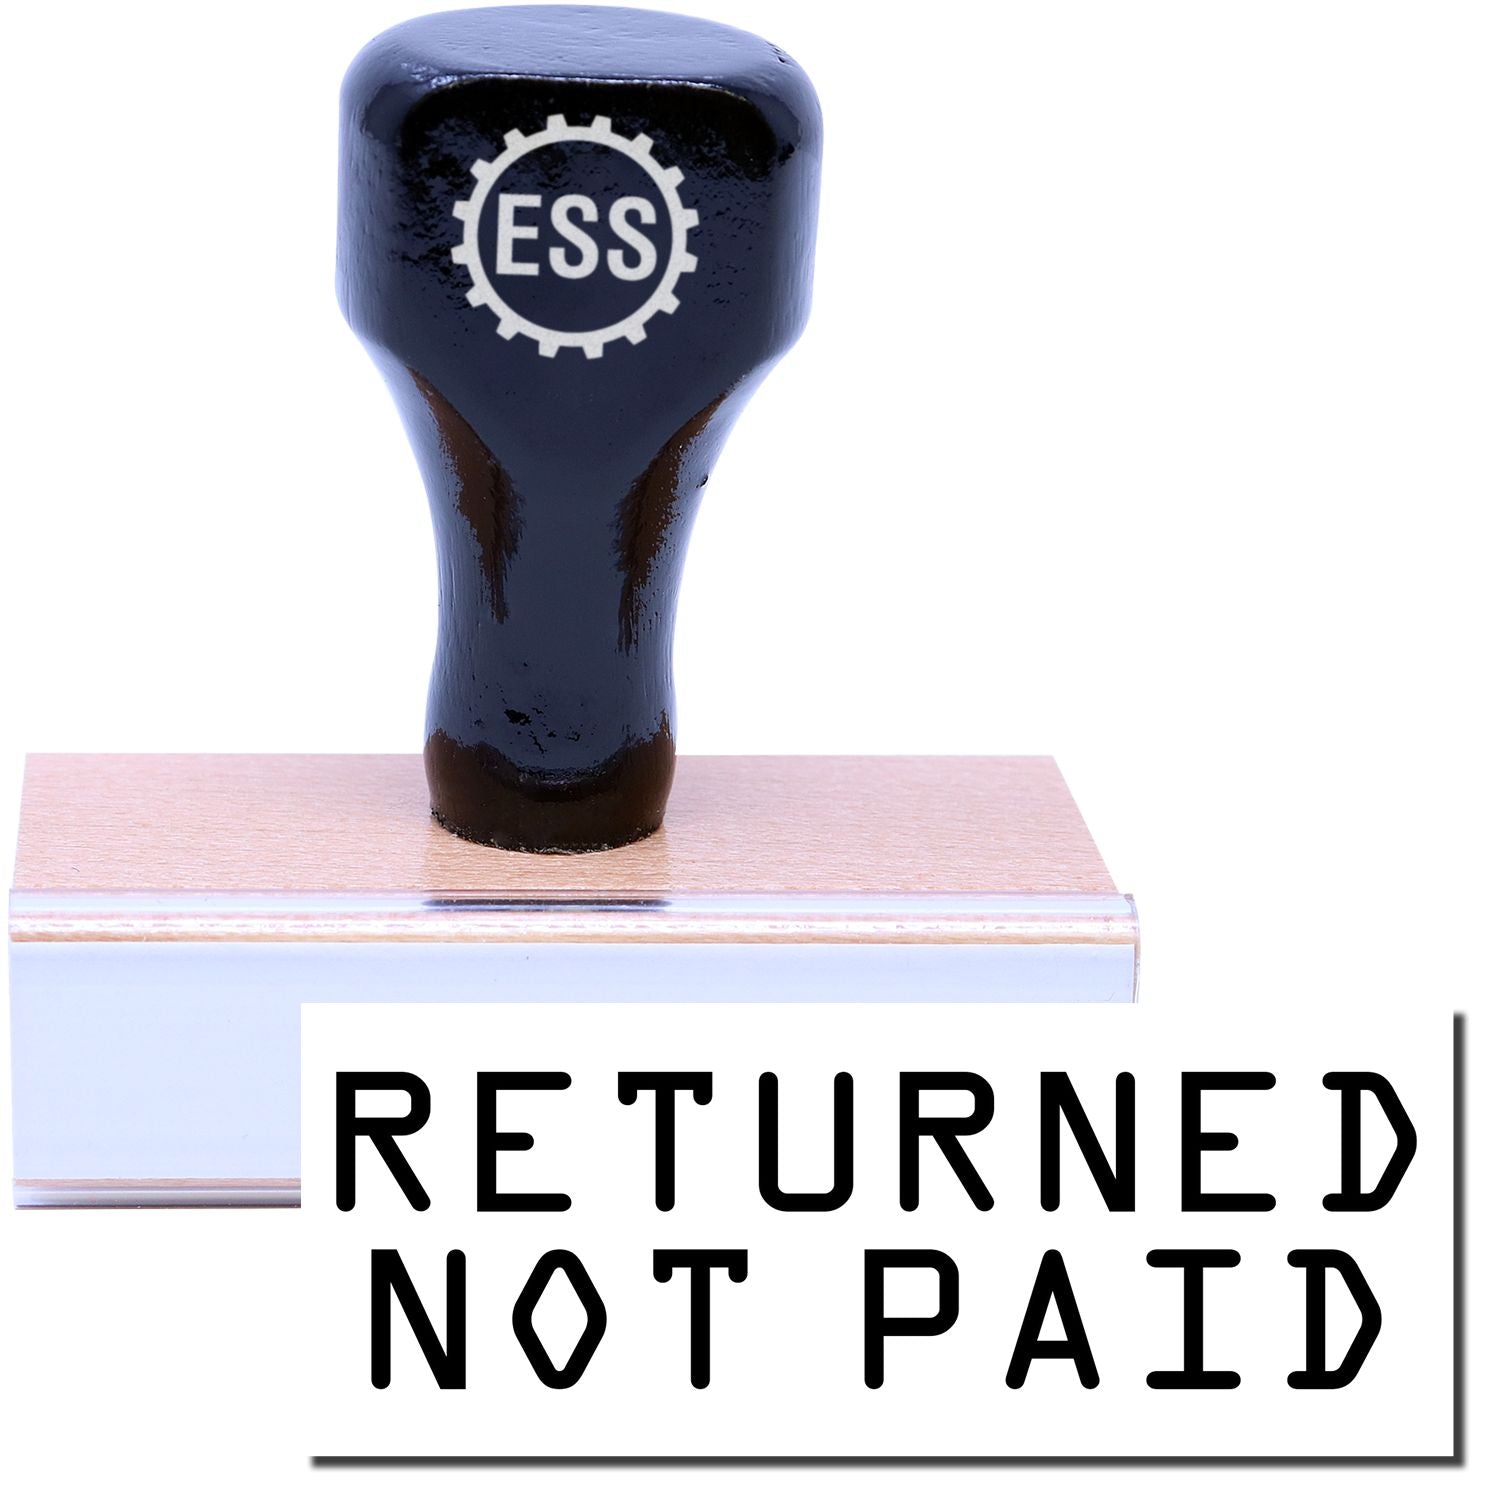 A stock office rubber stamp with a stamped image showing how the text "RETURNED NOT PAID" in a large font is displayed after stamping.